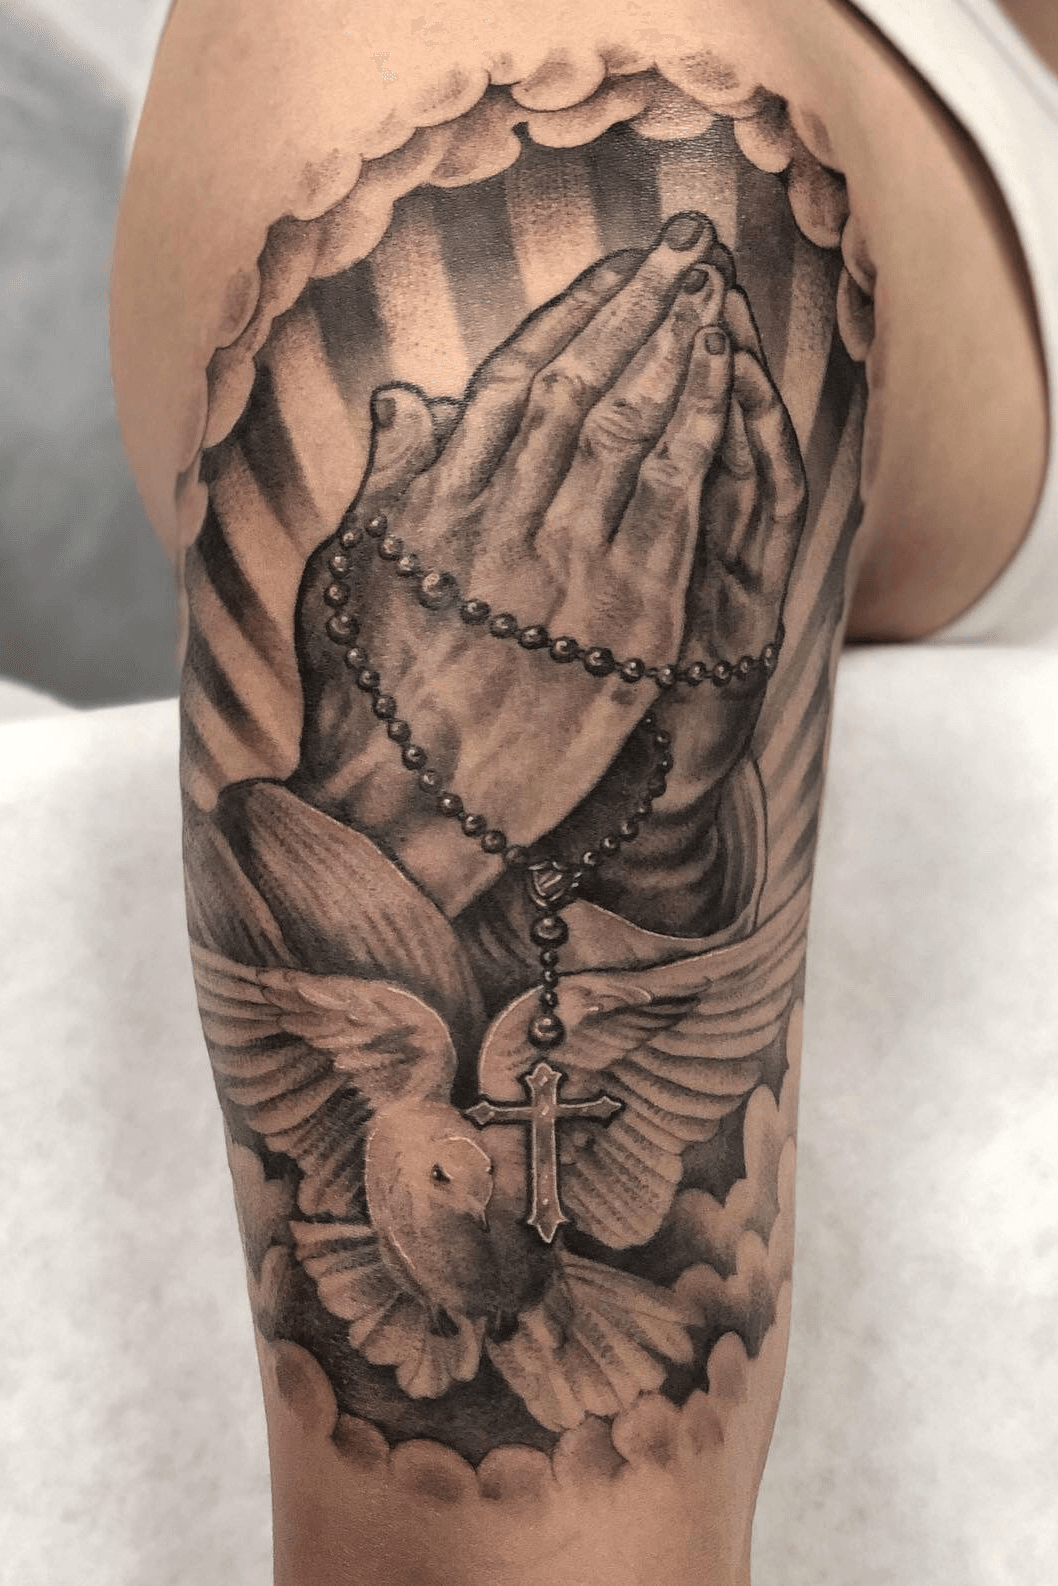 Tattoo uploaded by Justin JP Param  Mostly healed just finished the  background and som spots Always praying for better days Booking for 2020  now blackand grey prayinghandstattoo rosary dovetattoo sleevetattoo  peaces 